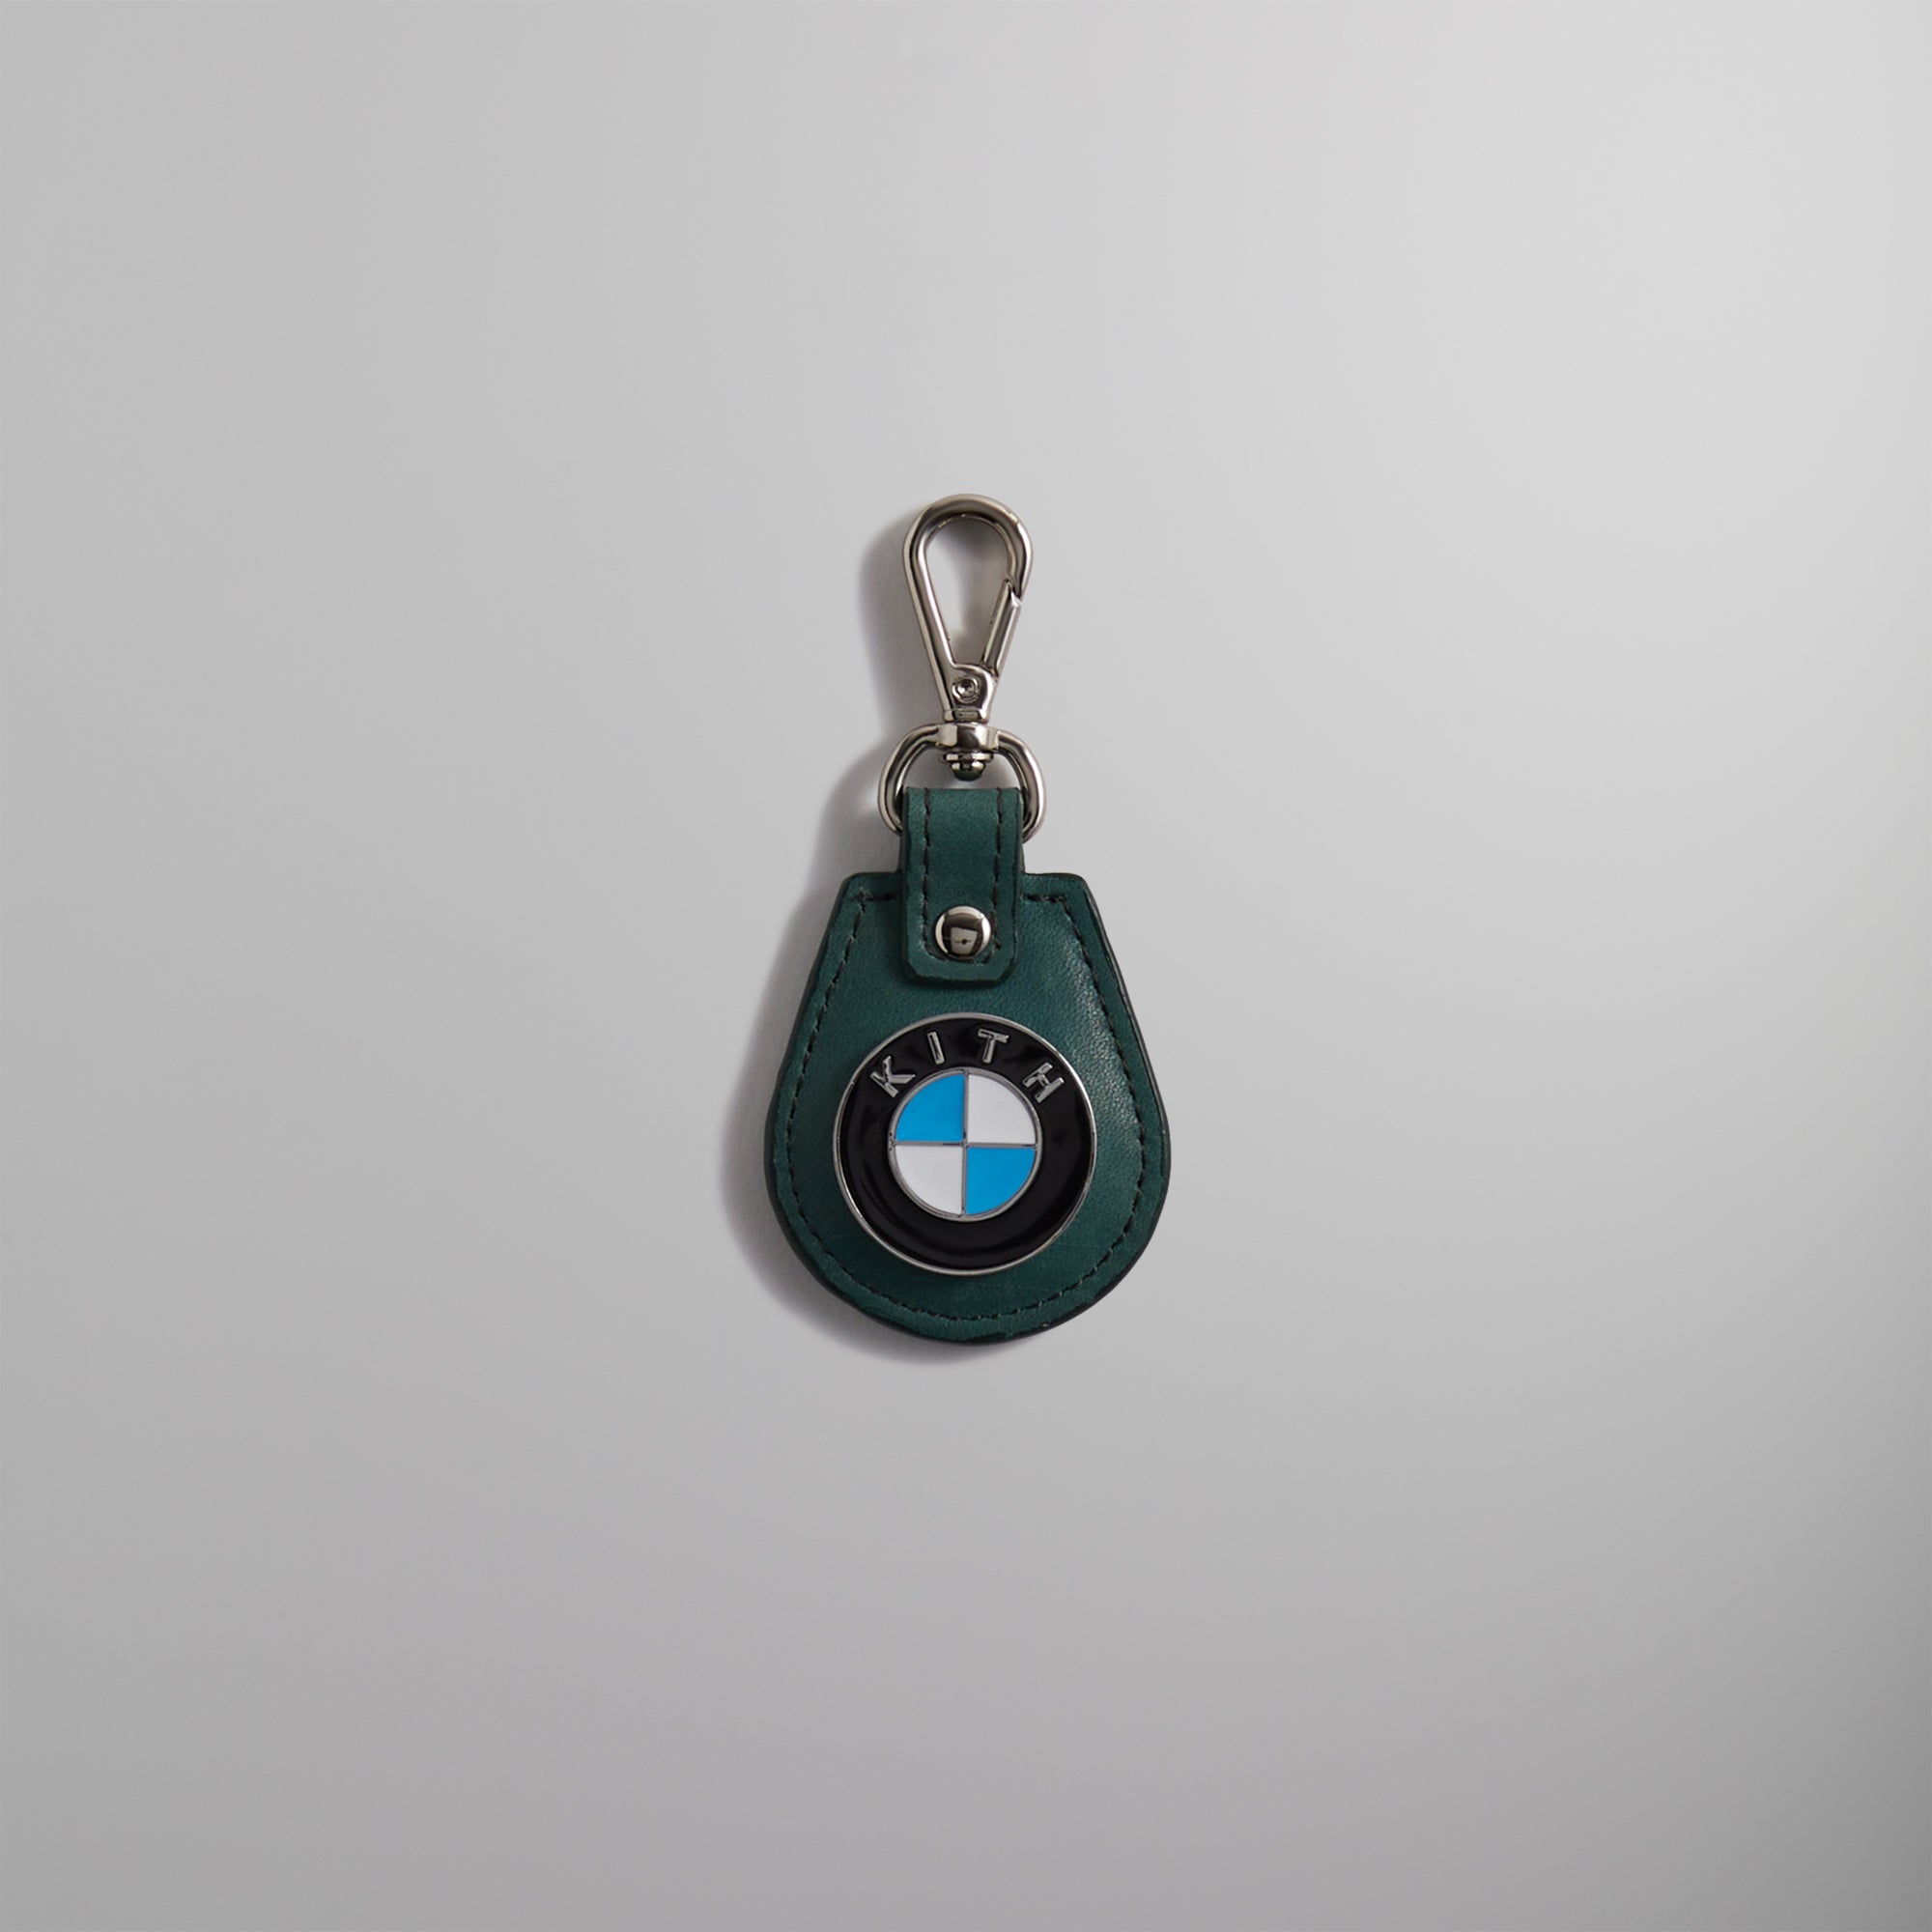 Kith for BMW Leather Keychain